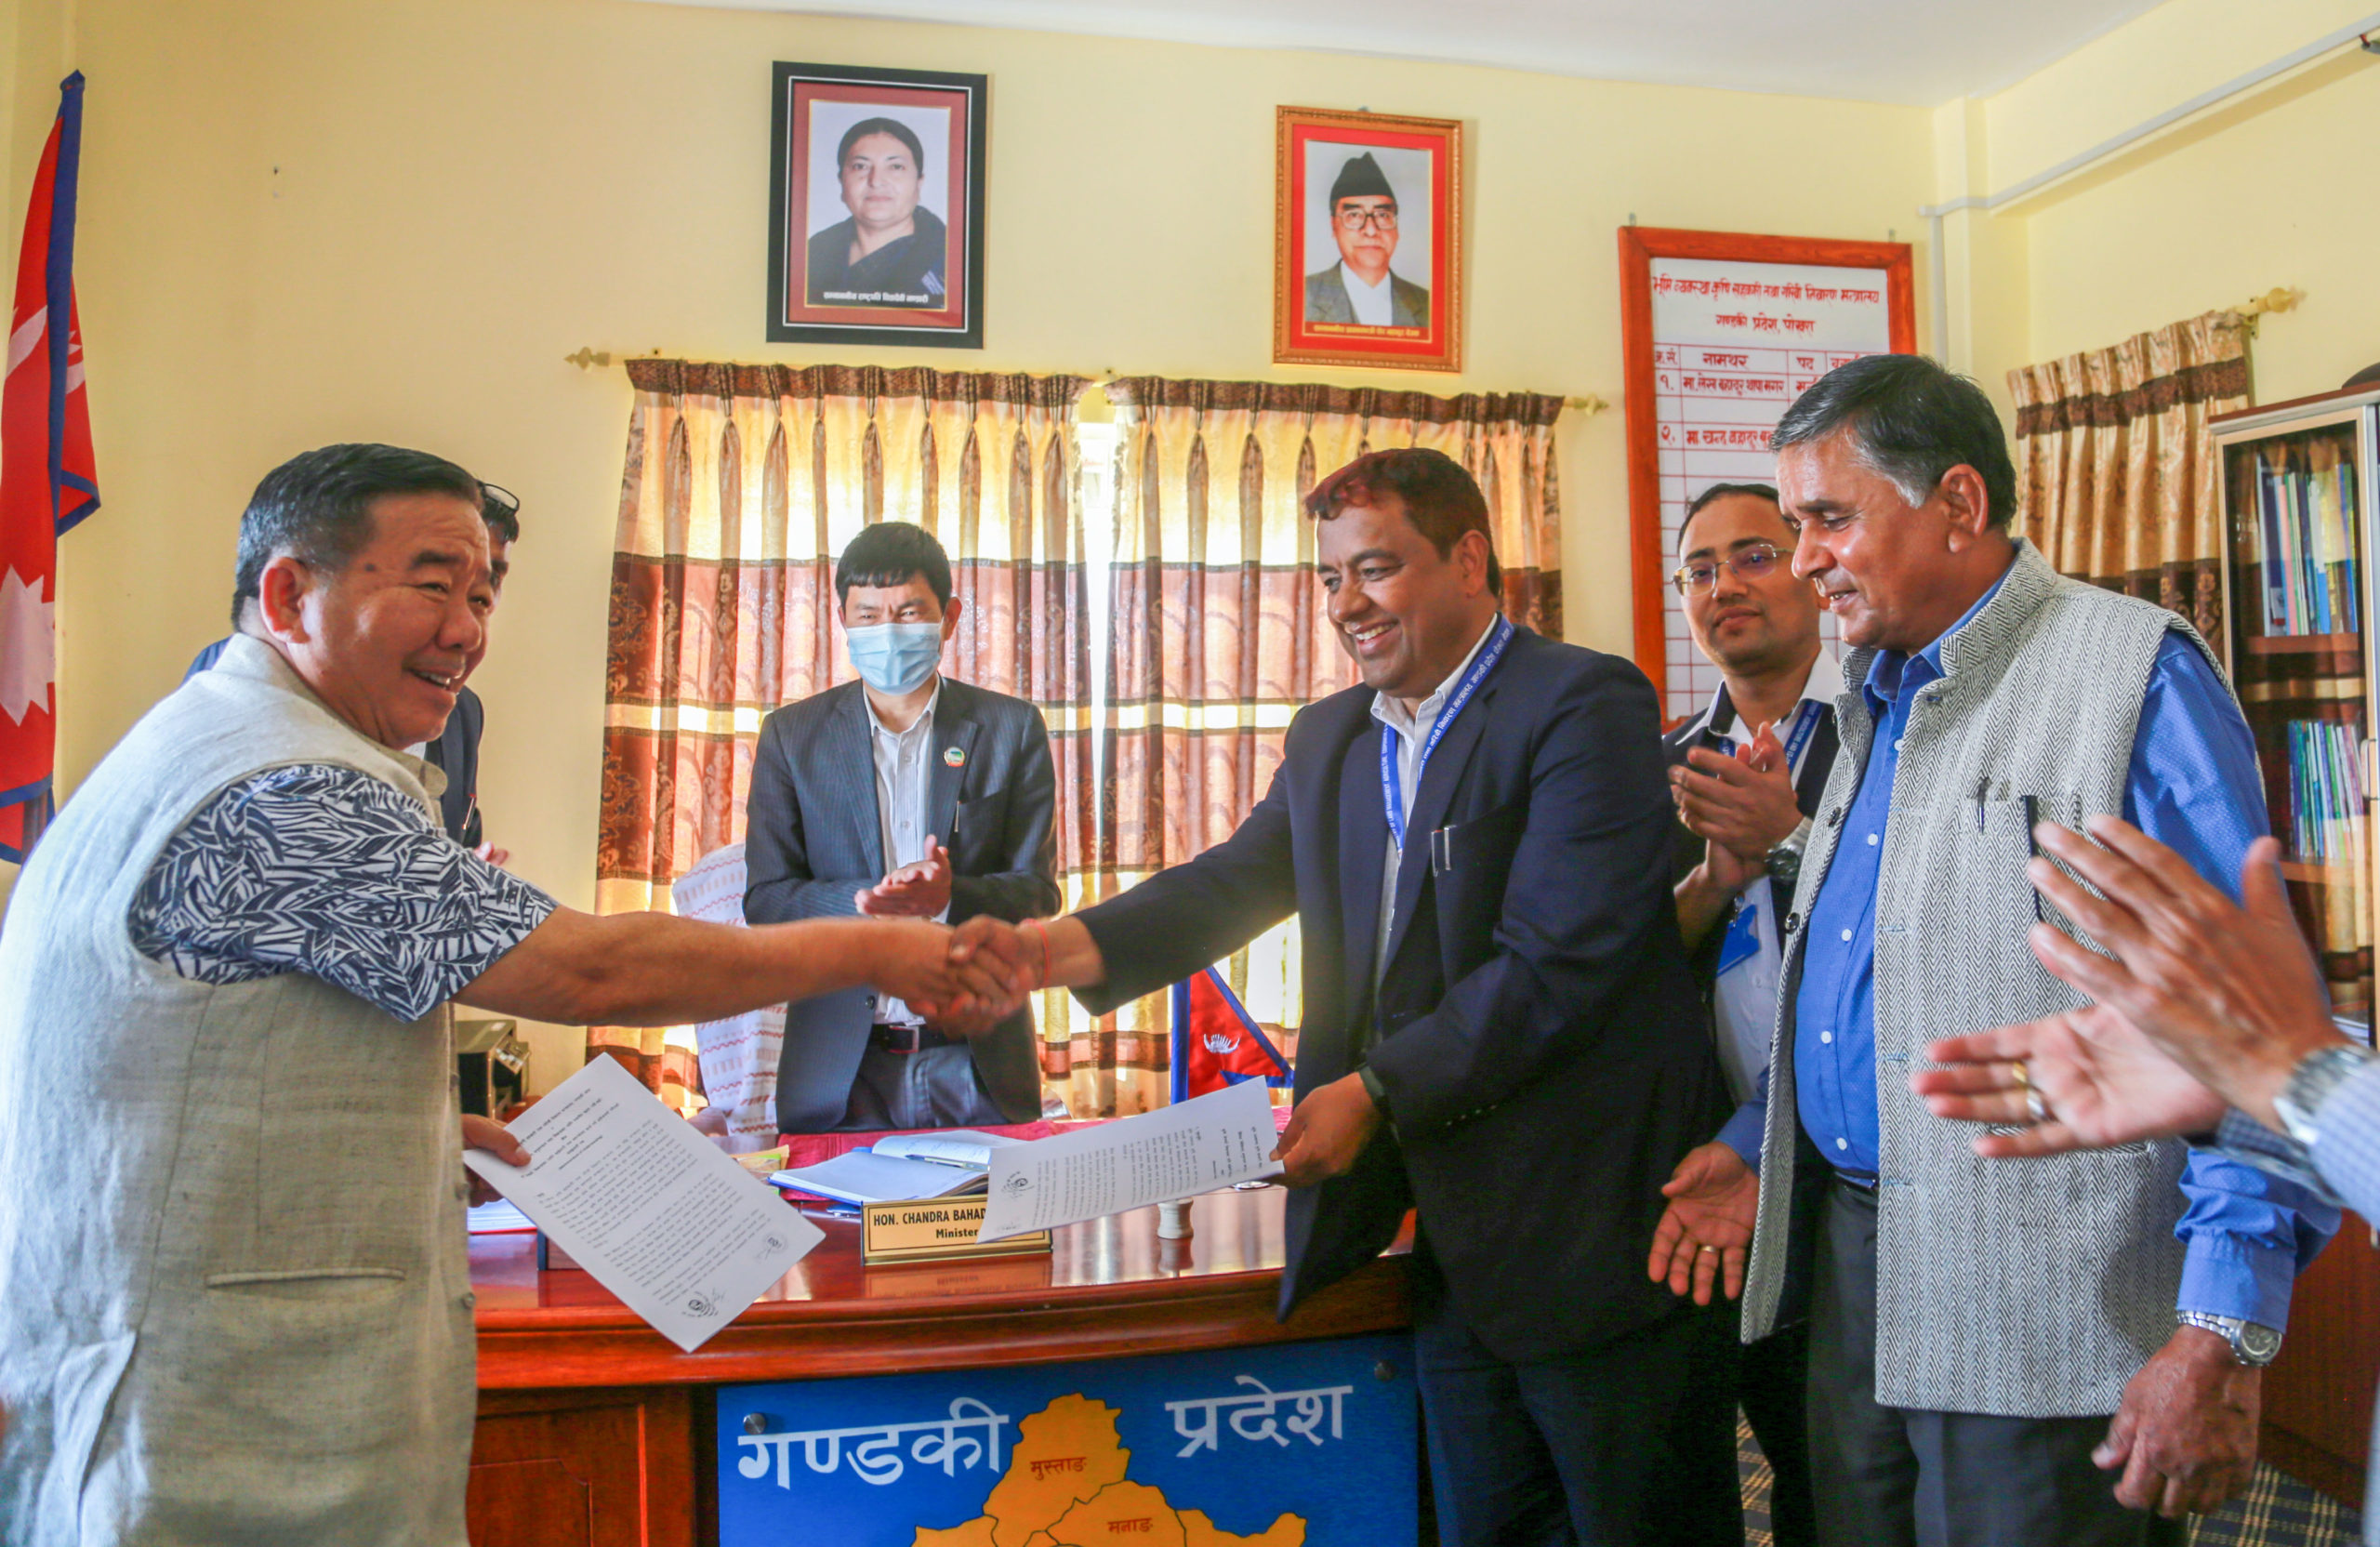 LI-BIRD and the Ministry of Land Management, Agriculture, Cooperative and Poverty Alleviation (MoLMACPA), Gandaki Province renewed​ Memorandum of Understanding